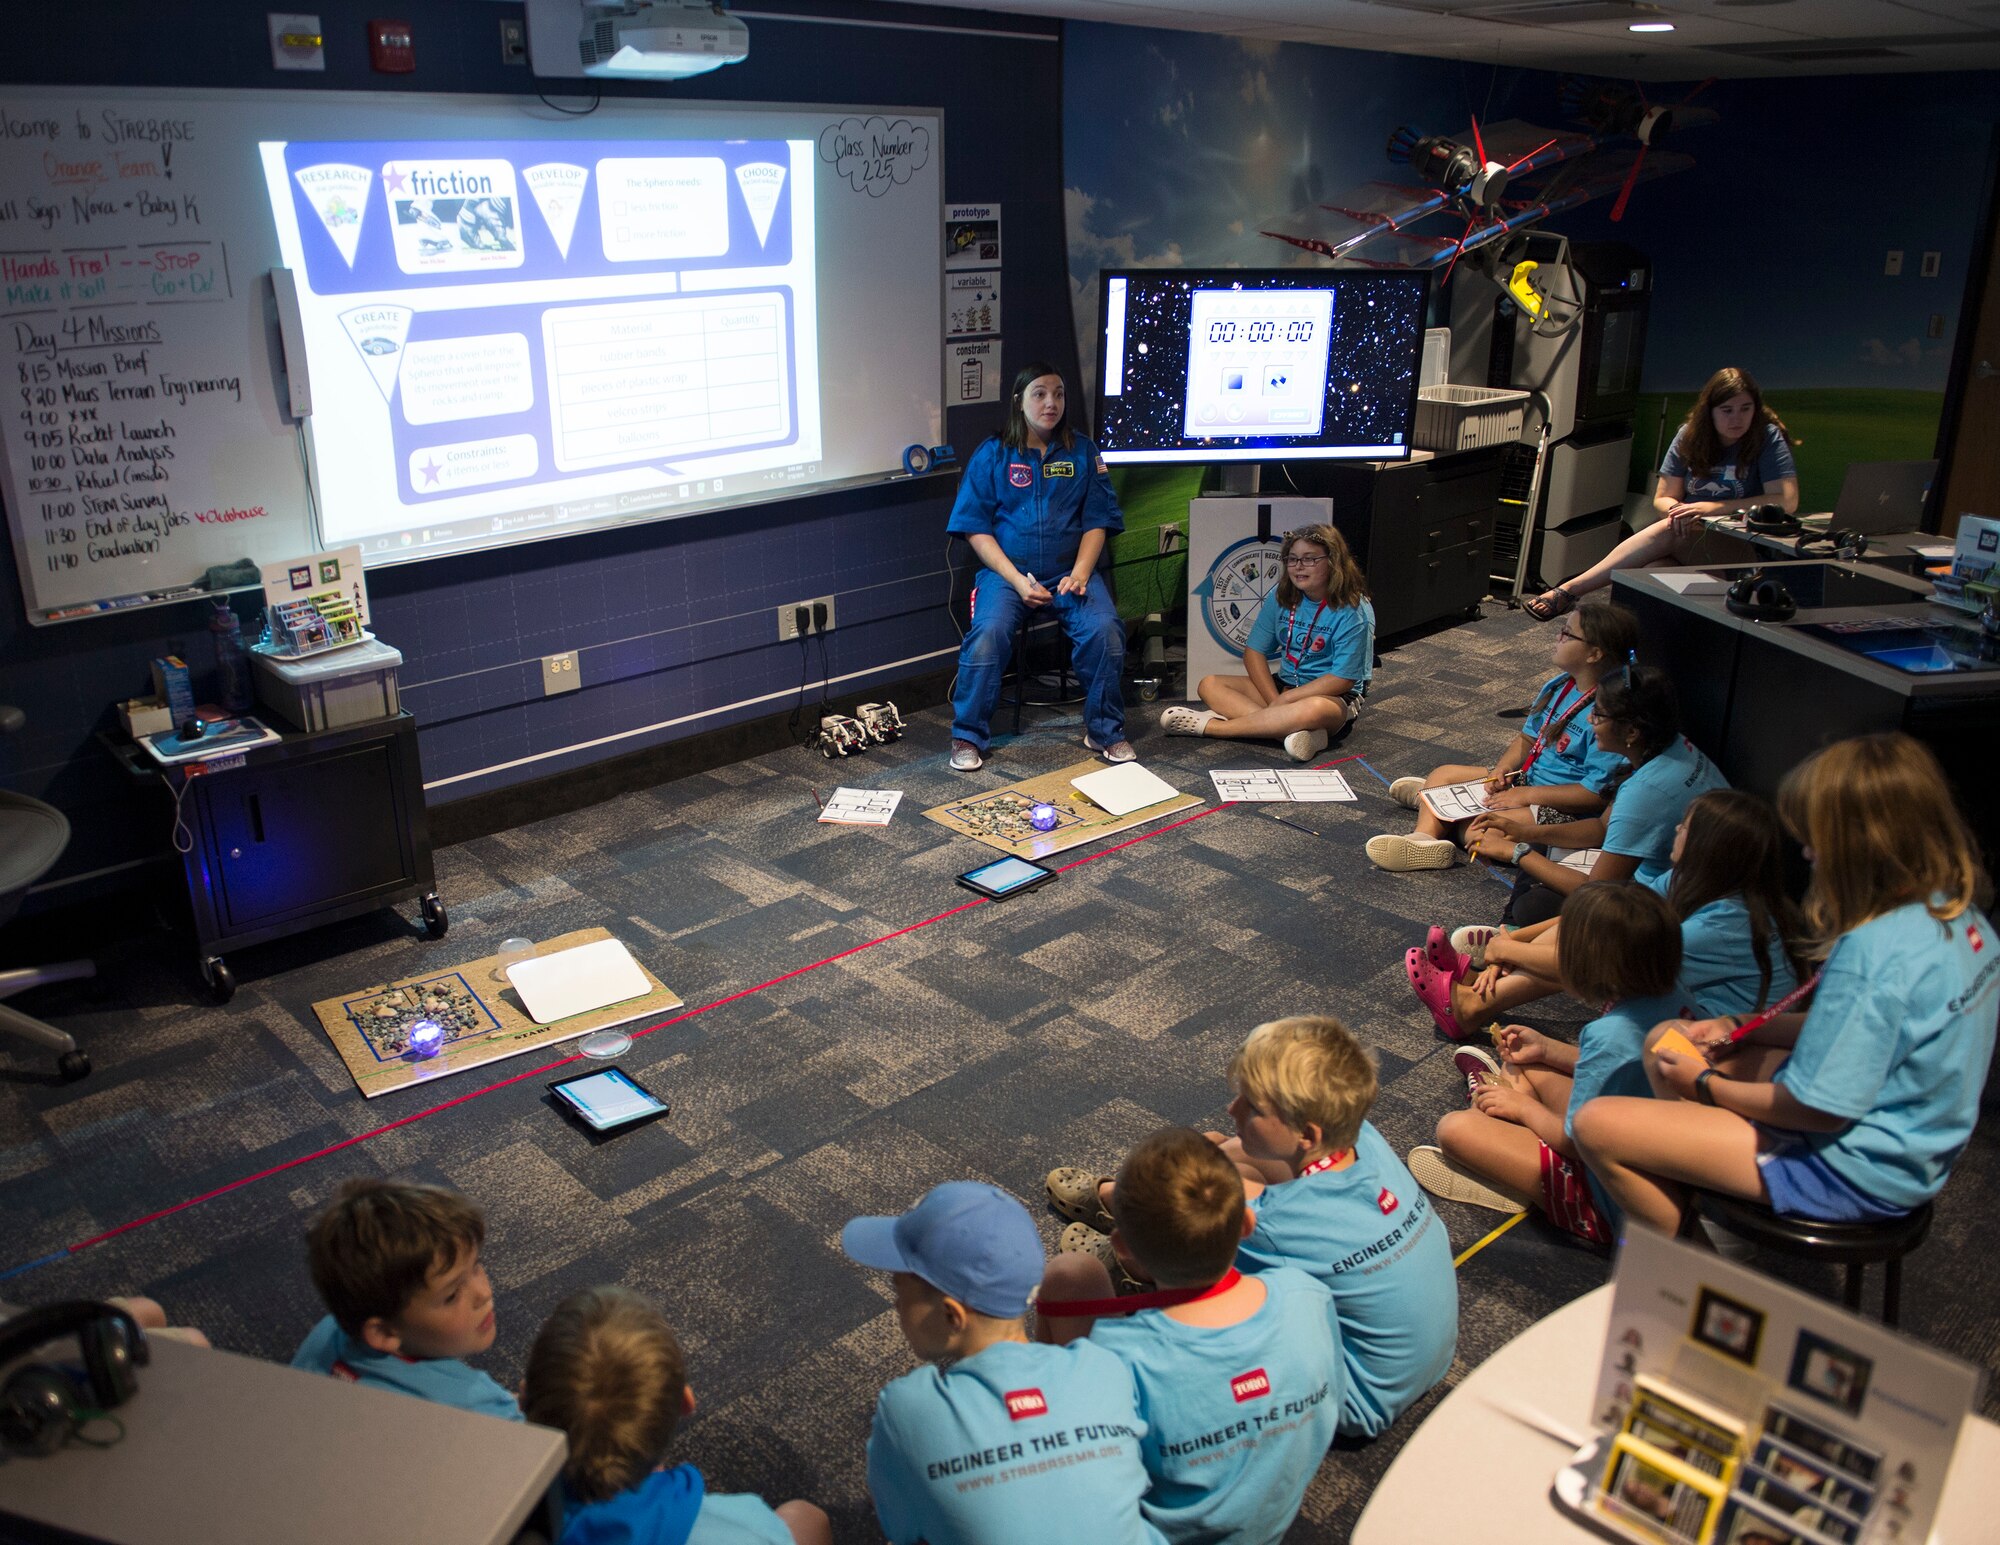 Students from STARBASE Minnesota participate in Science, Technology, Engineering and Math (STEM) in St. Paul, Minn., July 18, 2019.